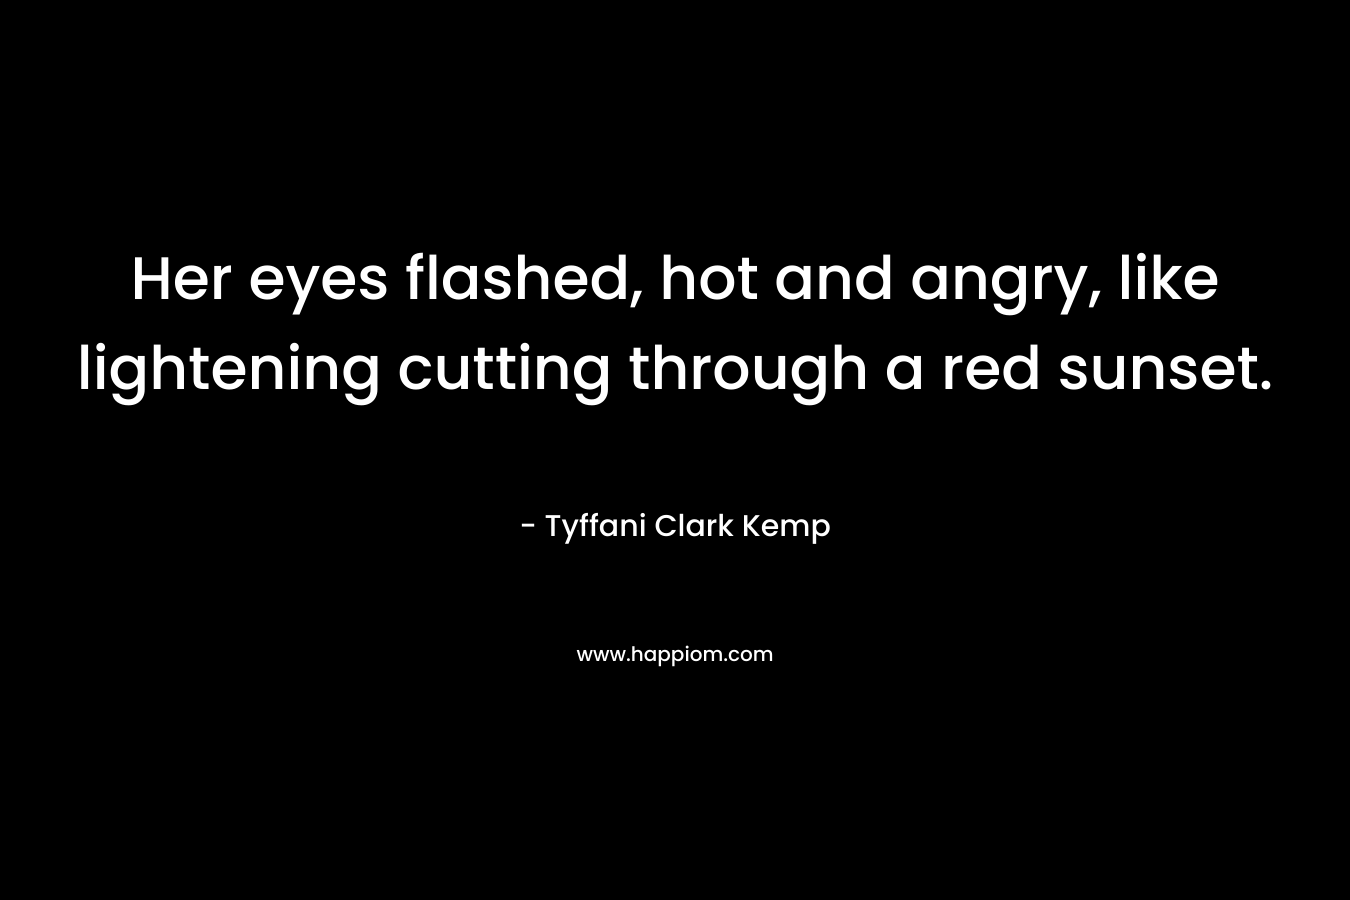 Her eyes flashed, hot and angry, like lightening cutting through a red sunset.